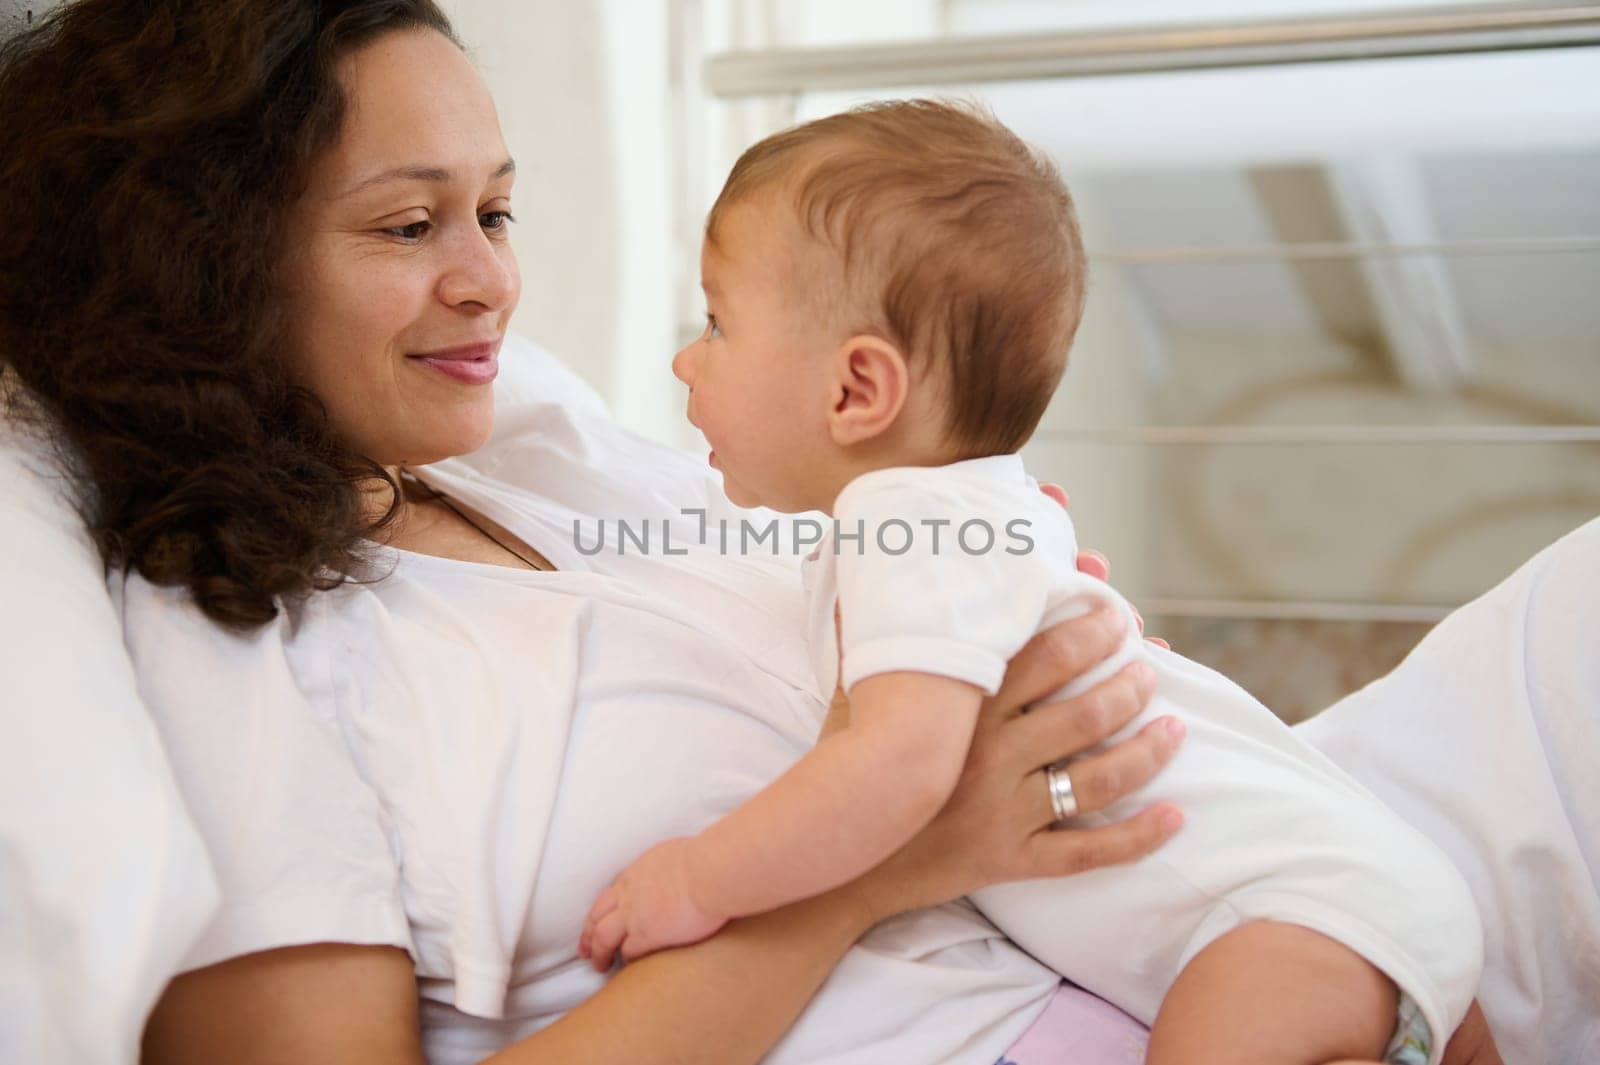 Newborn baby in tender embrace of mother. Happy delightful young smiling woman, affectionate loving mother caring of her newborn baby at home, lying together on the bed at cozy and light home interior